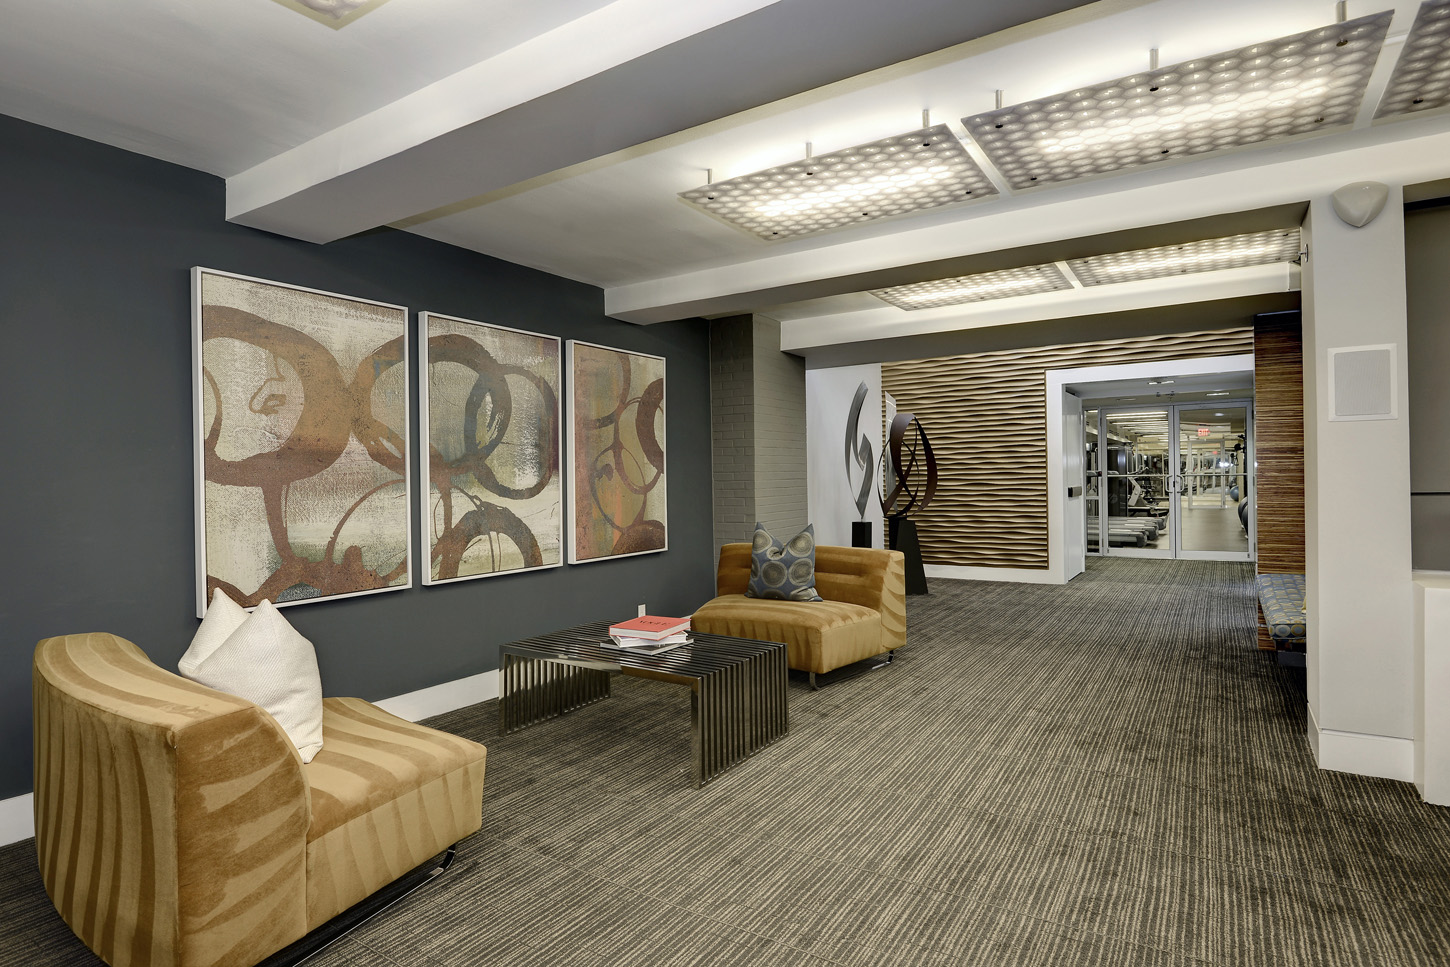 Clubroom hallway with armchairs and abstract art